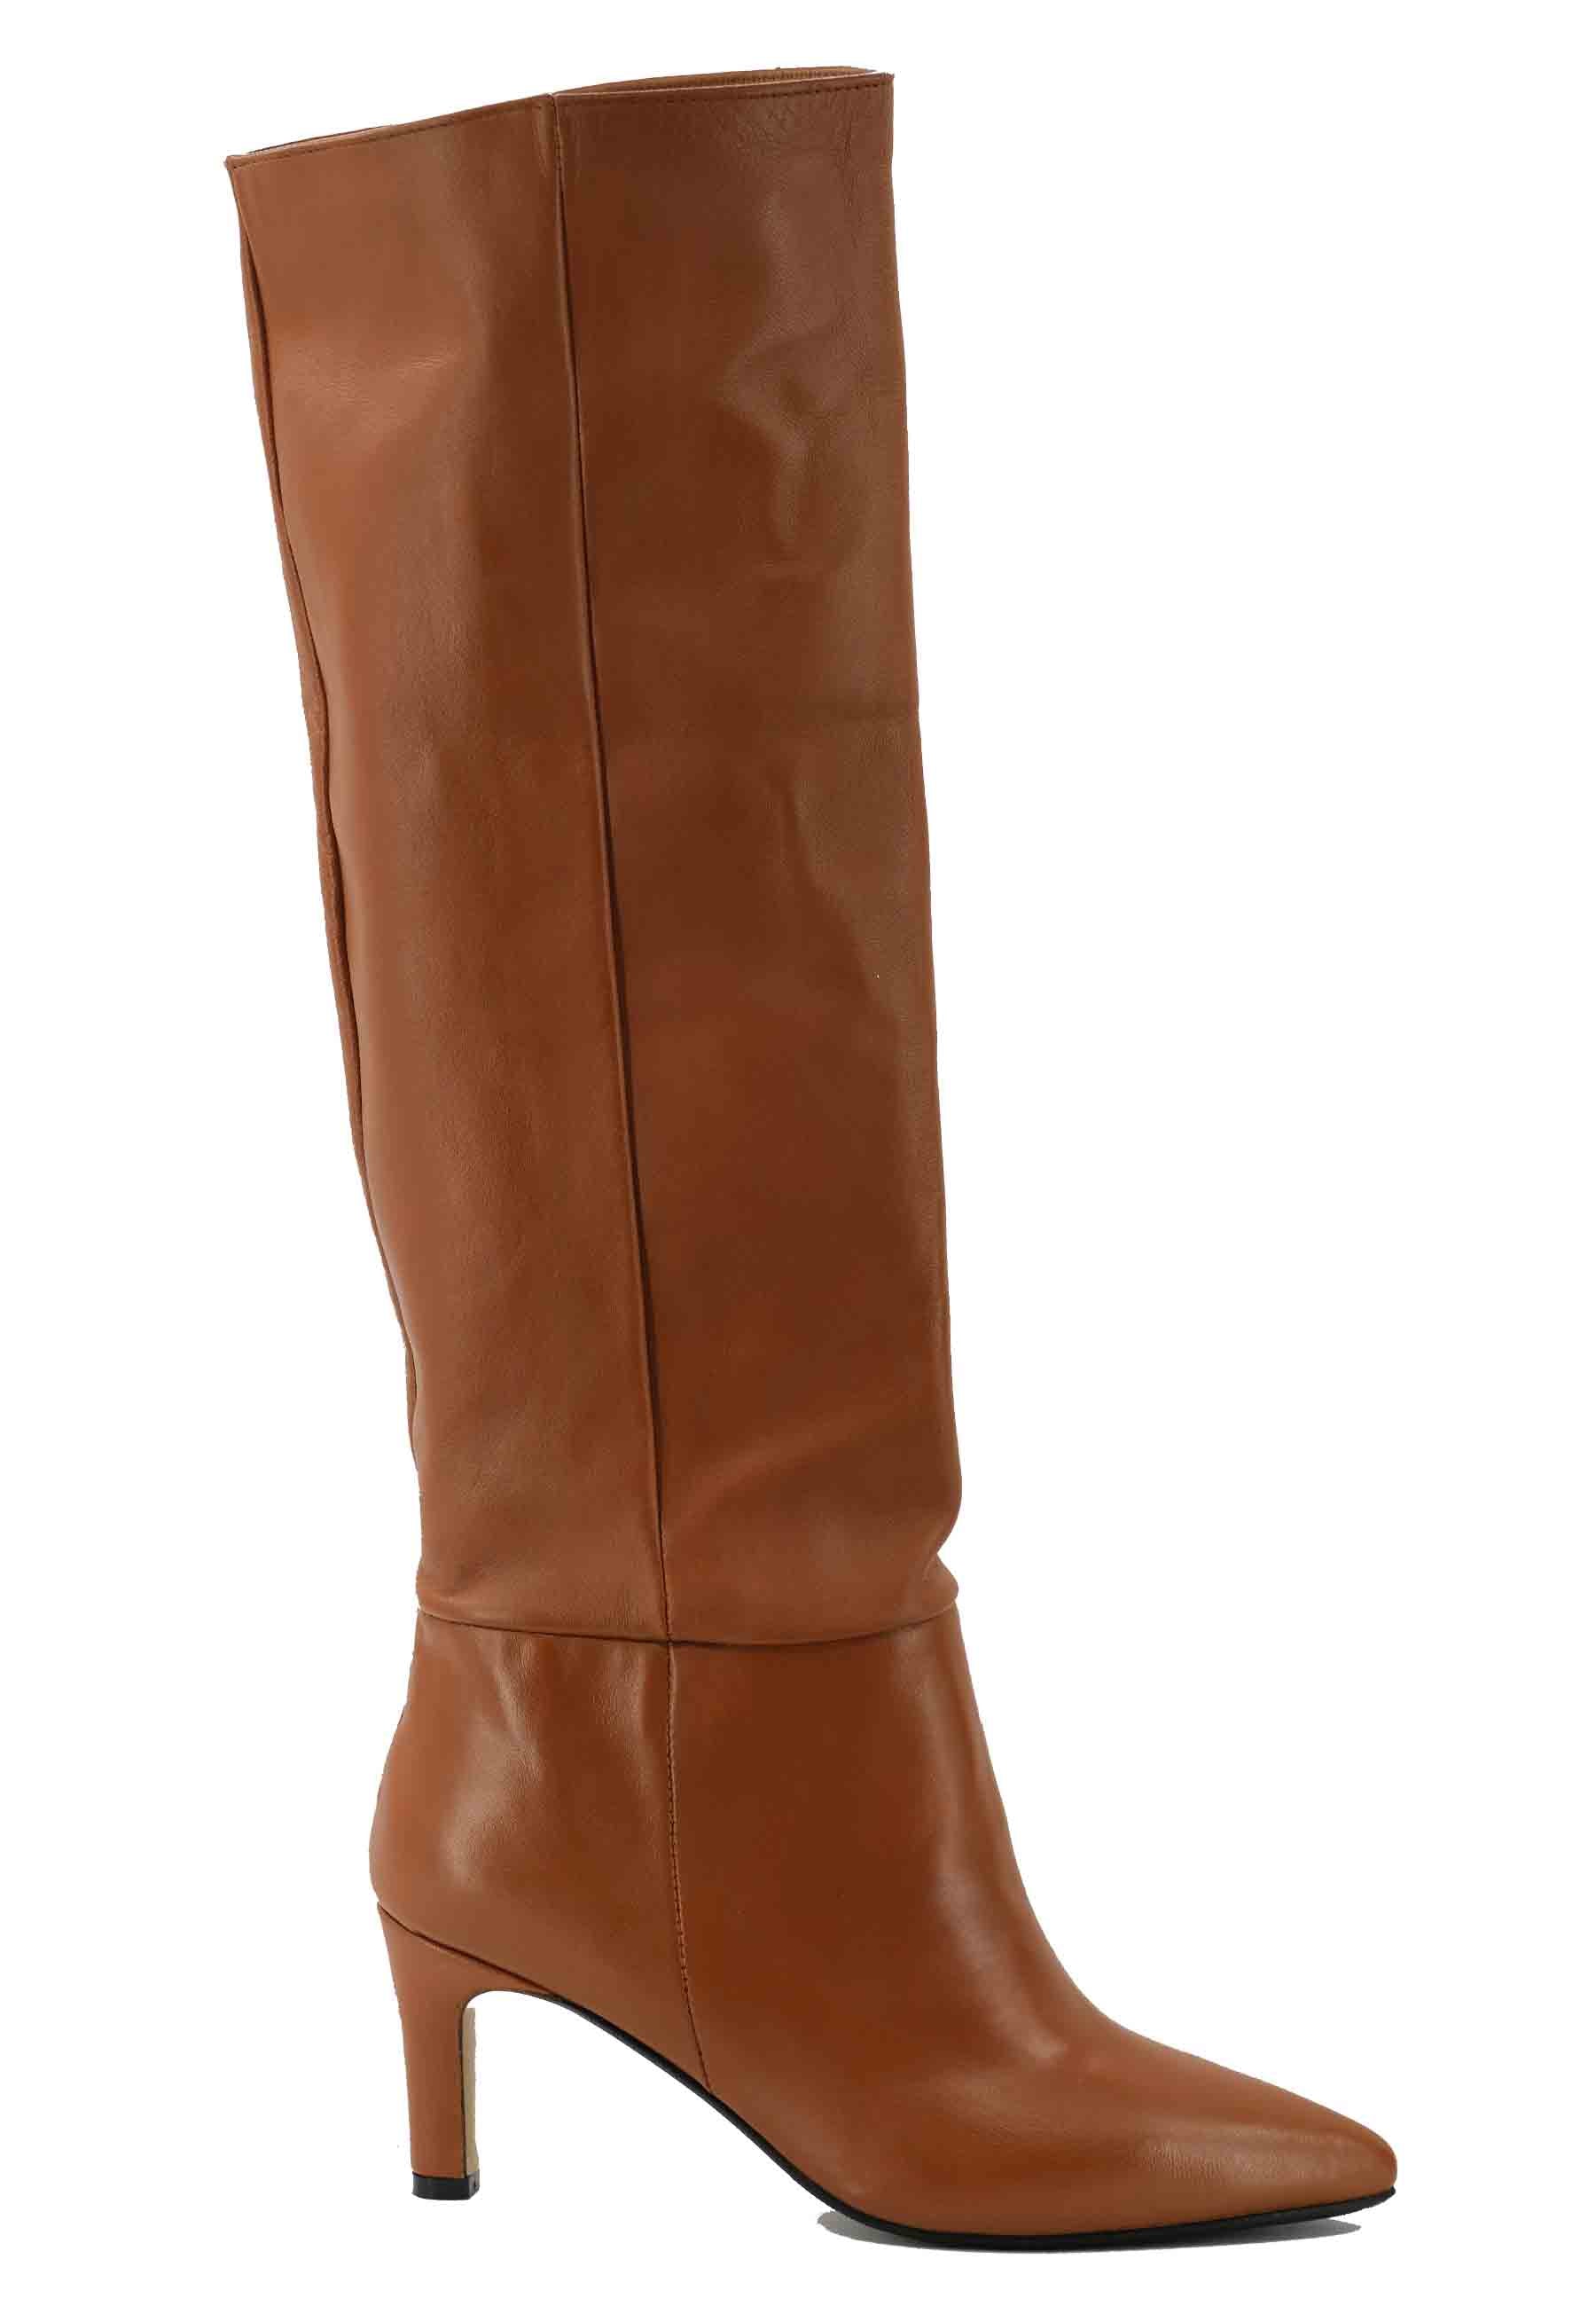 ST1230 tube boots in tan leather with medium heel